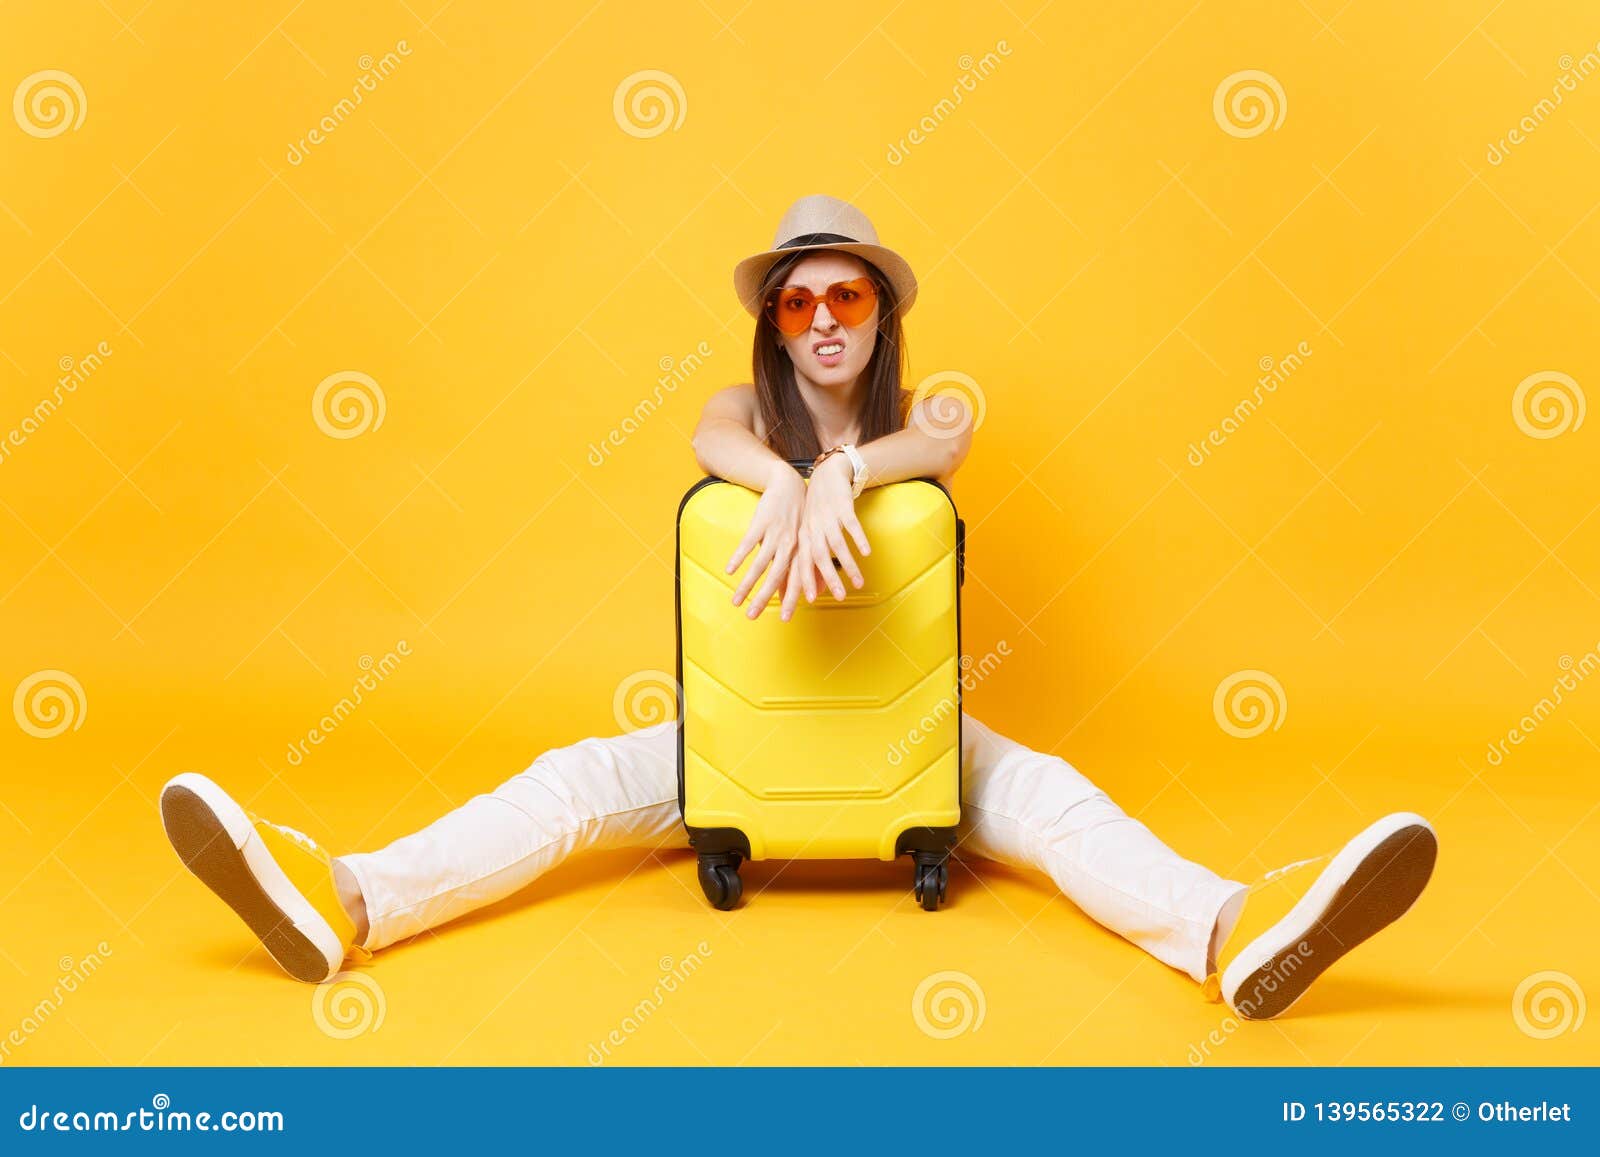 sad traveler tourist woman in summer casual clothes, hat sit near suitcase on yellow orange background. female